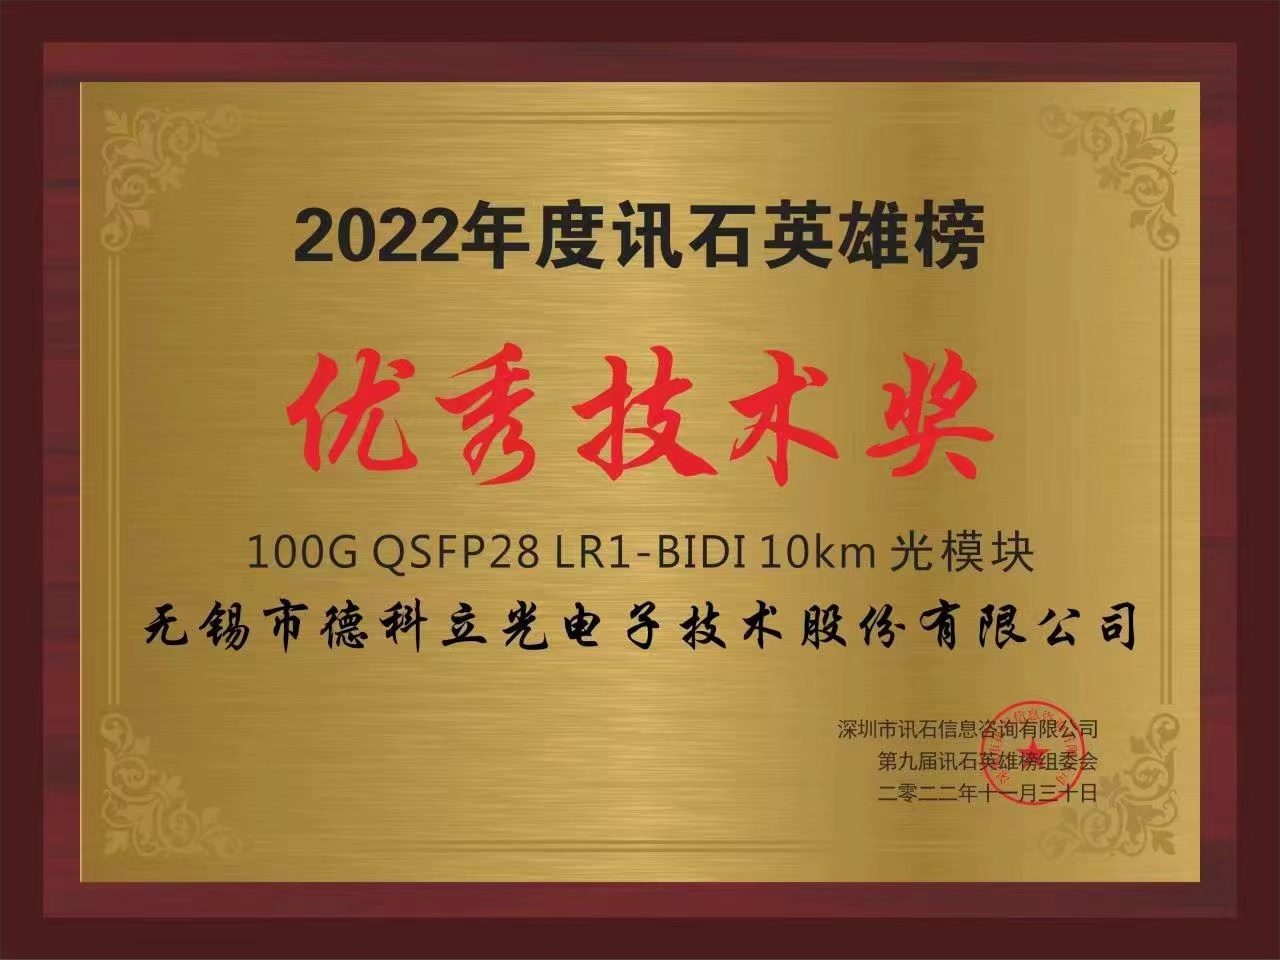 Taclink 100G QSFP28 LR1-BIDI 10km optical Transceiver module was awarded Excellent Technology Award of the Year 2022 by IFOC 2022